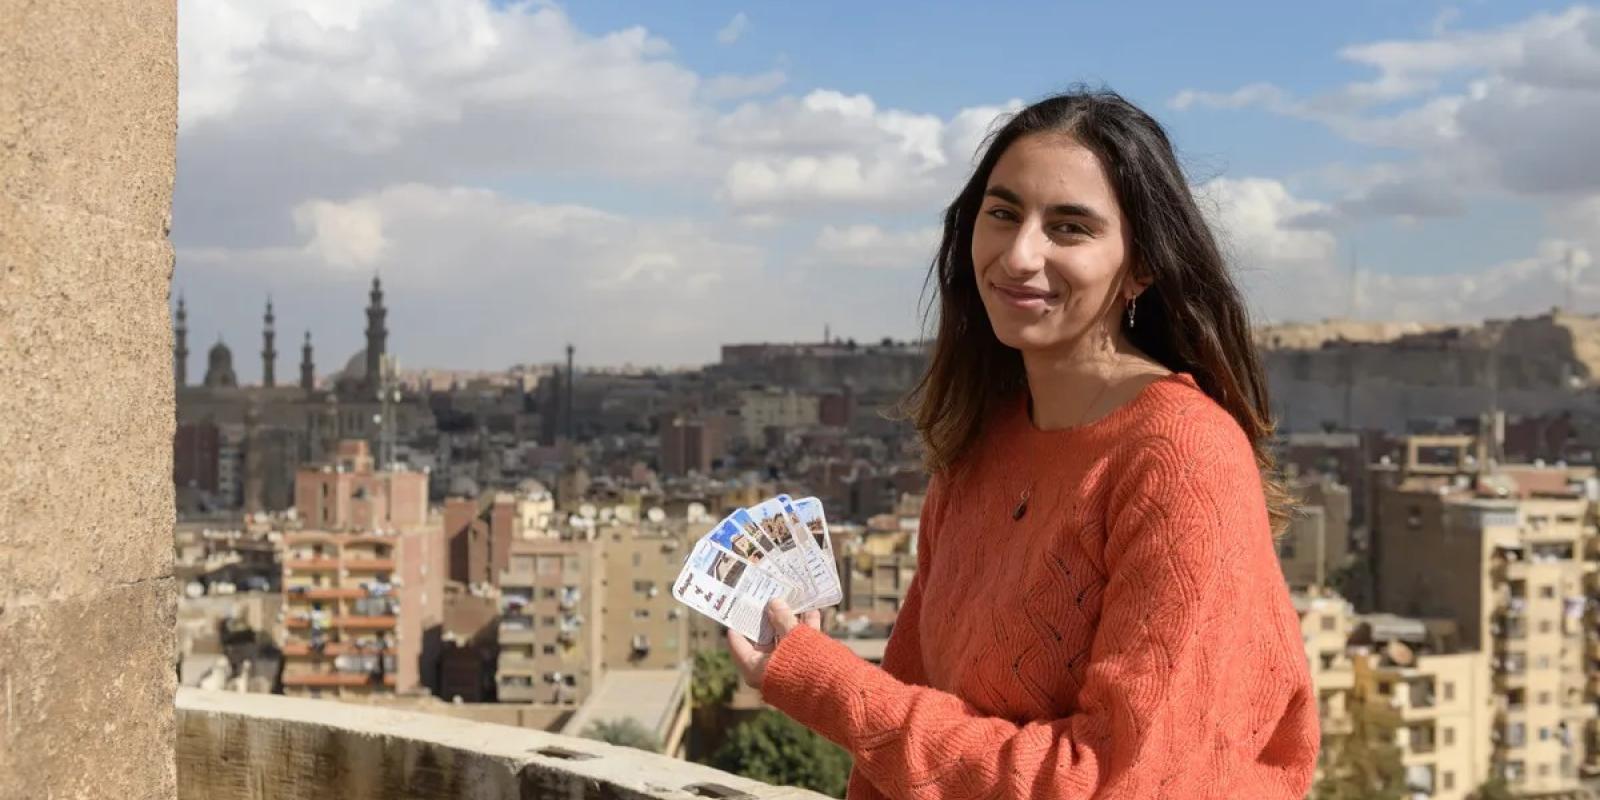 A girl is standing on a roof top surrounded by houses. She is smiling and holding cards.